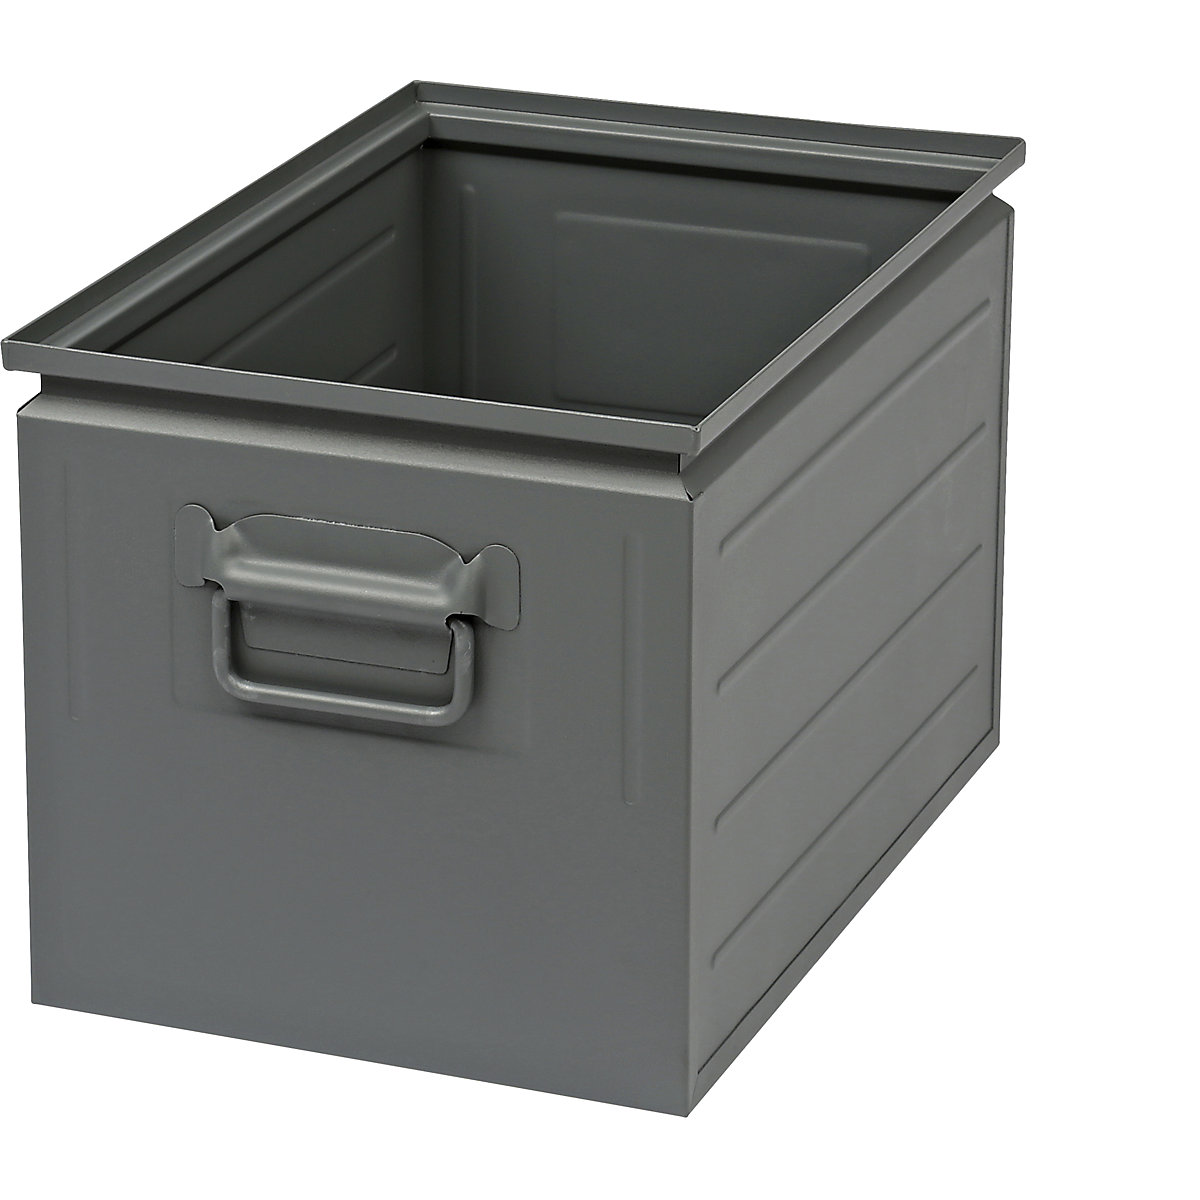 Stacking container made of sheet steel, capacity approx. 35 l, basalt grey RAL 7012-4